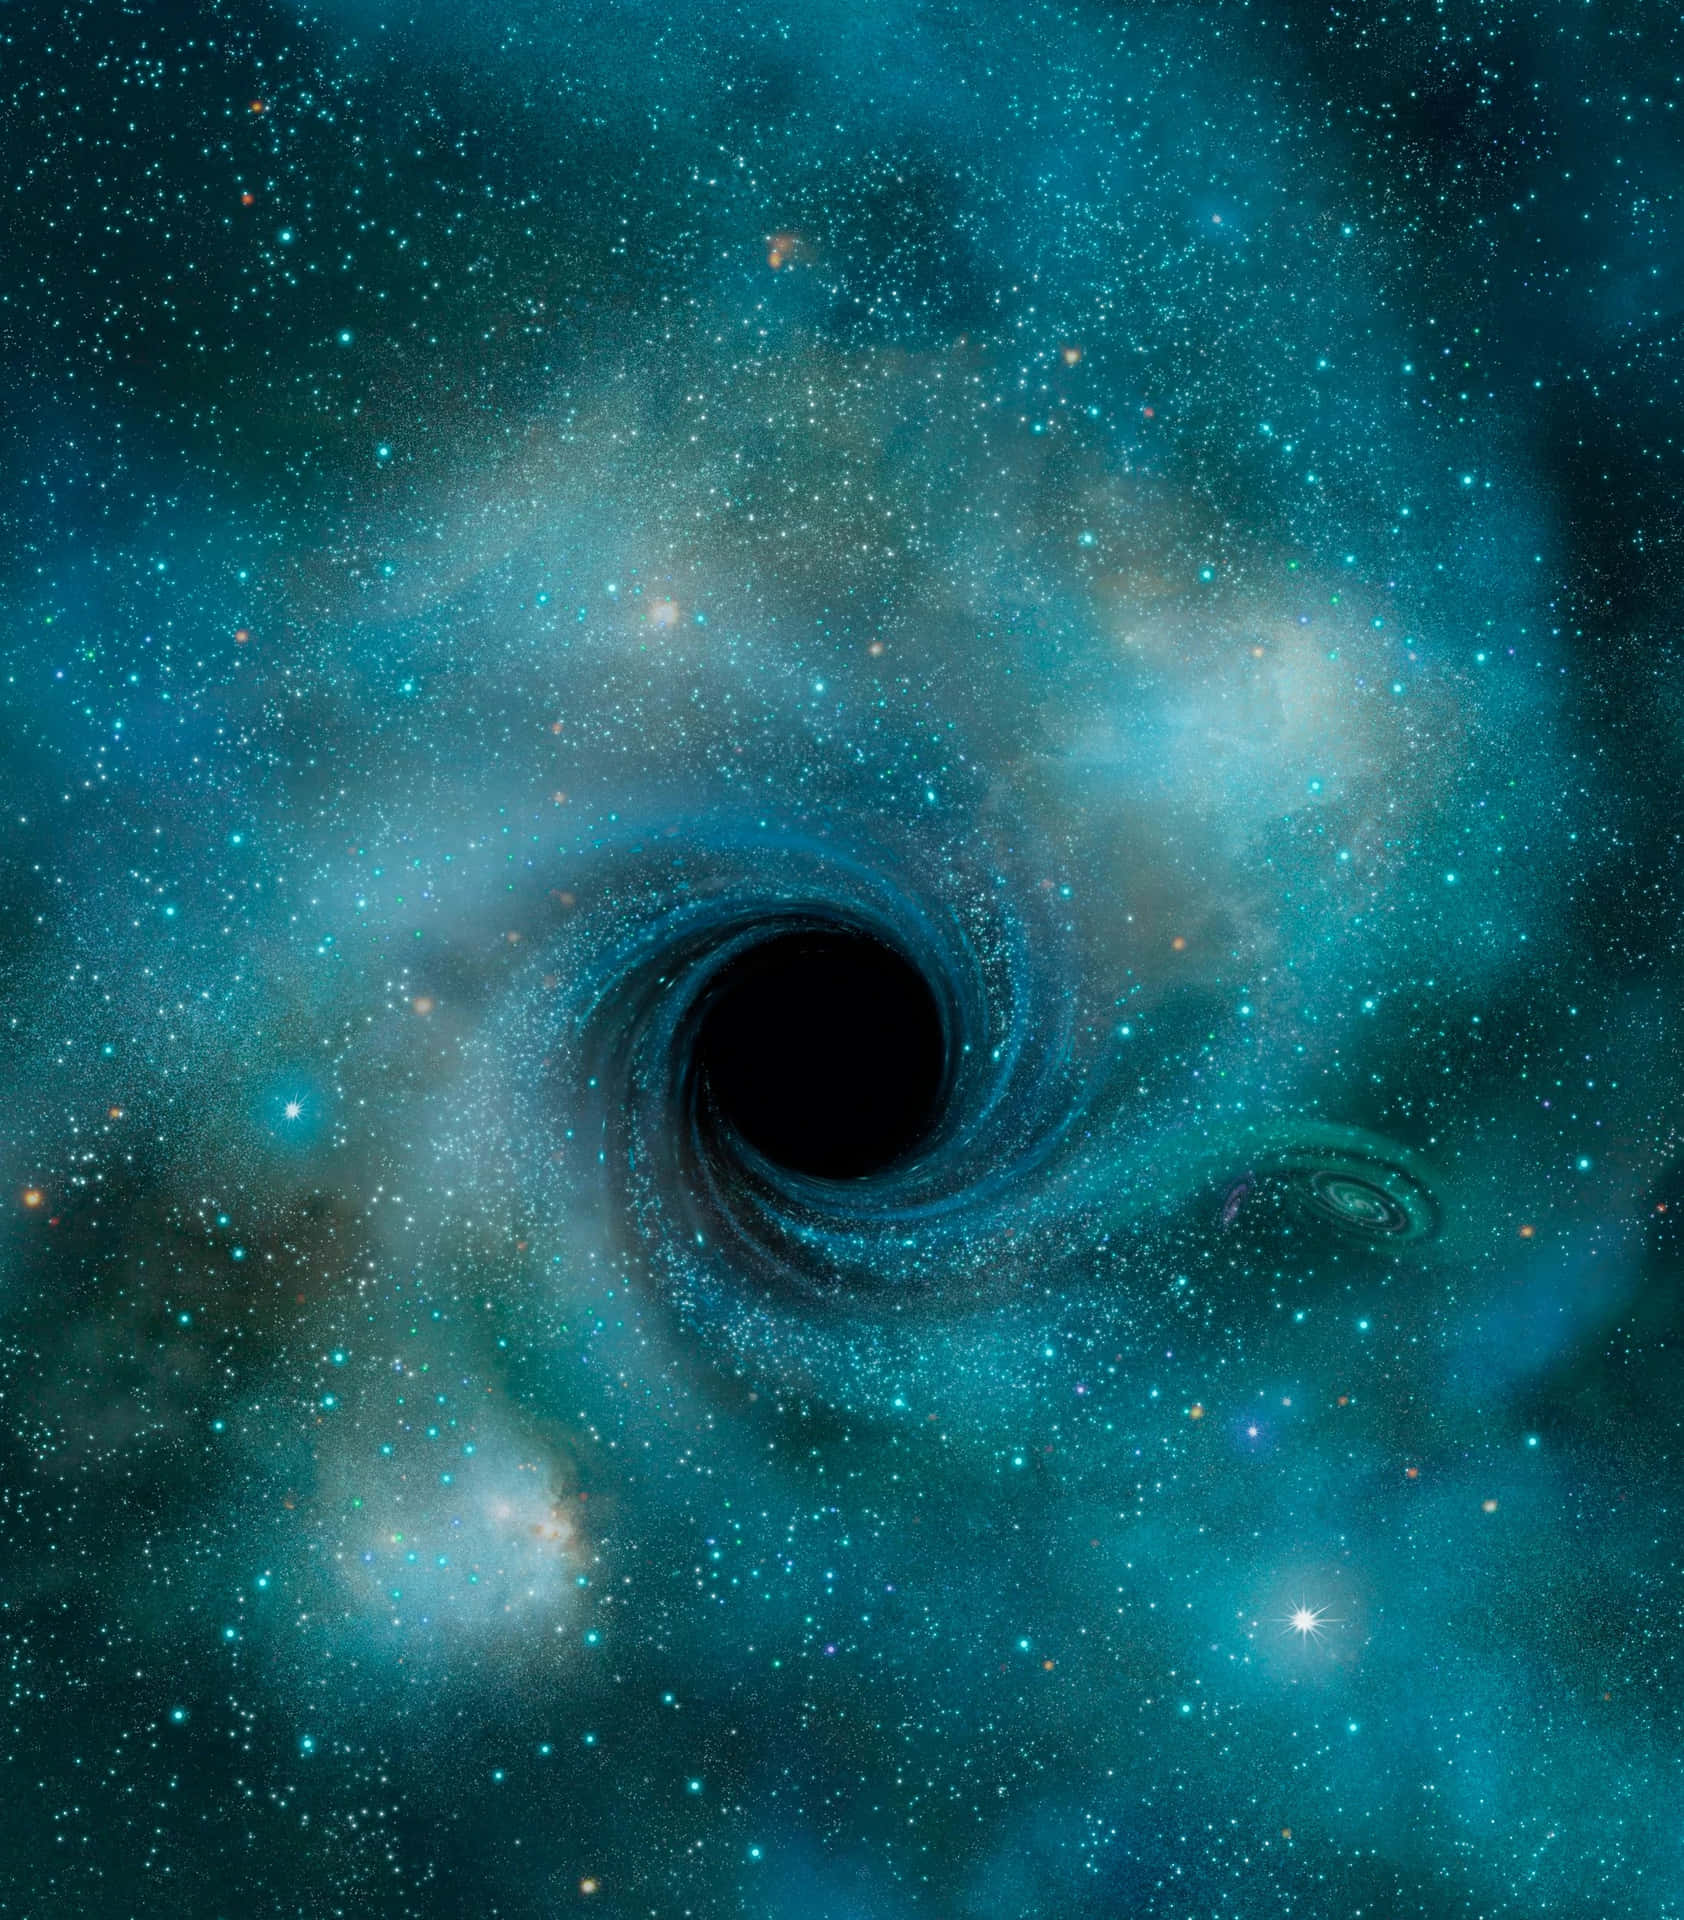 New Image of a Supermassive Black Hole Captured by the Hubble Telescope